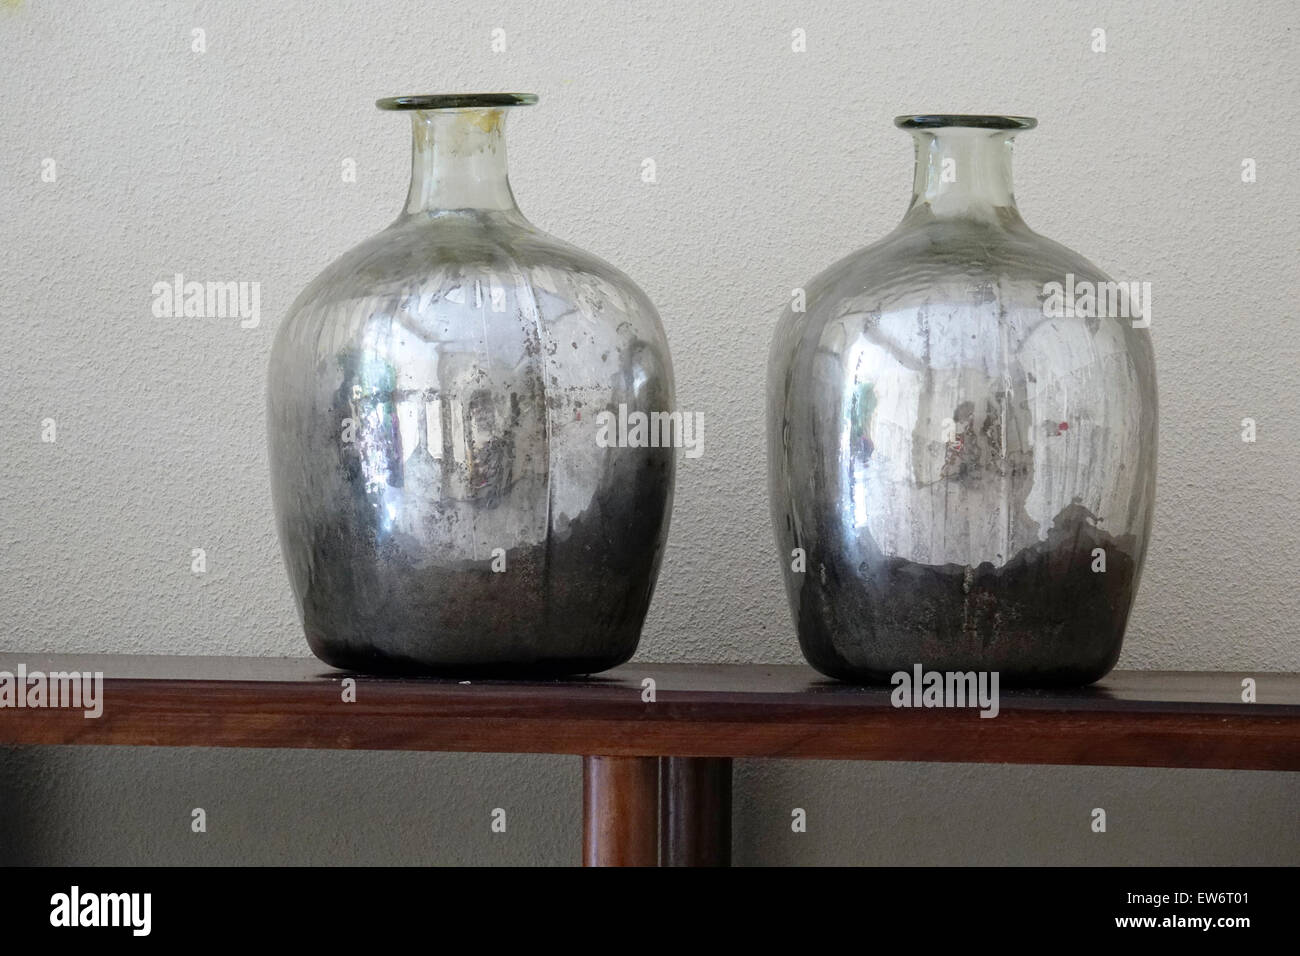 Pair of silvered Mexican vases Stock Photo